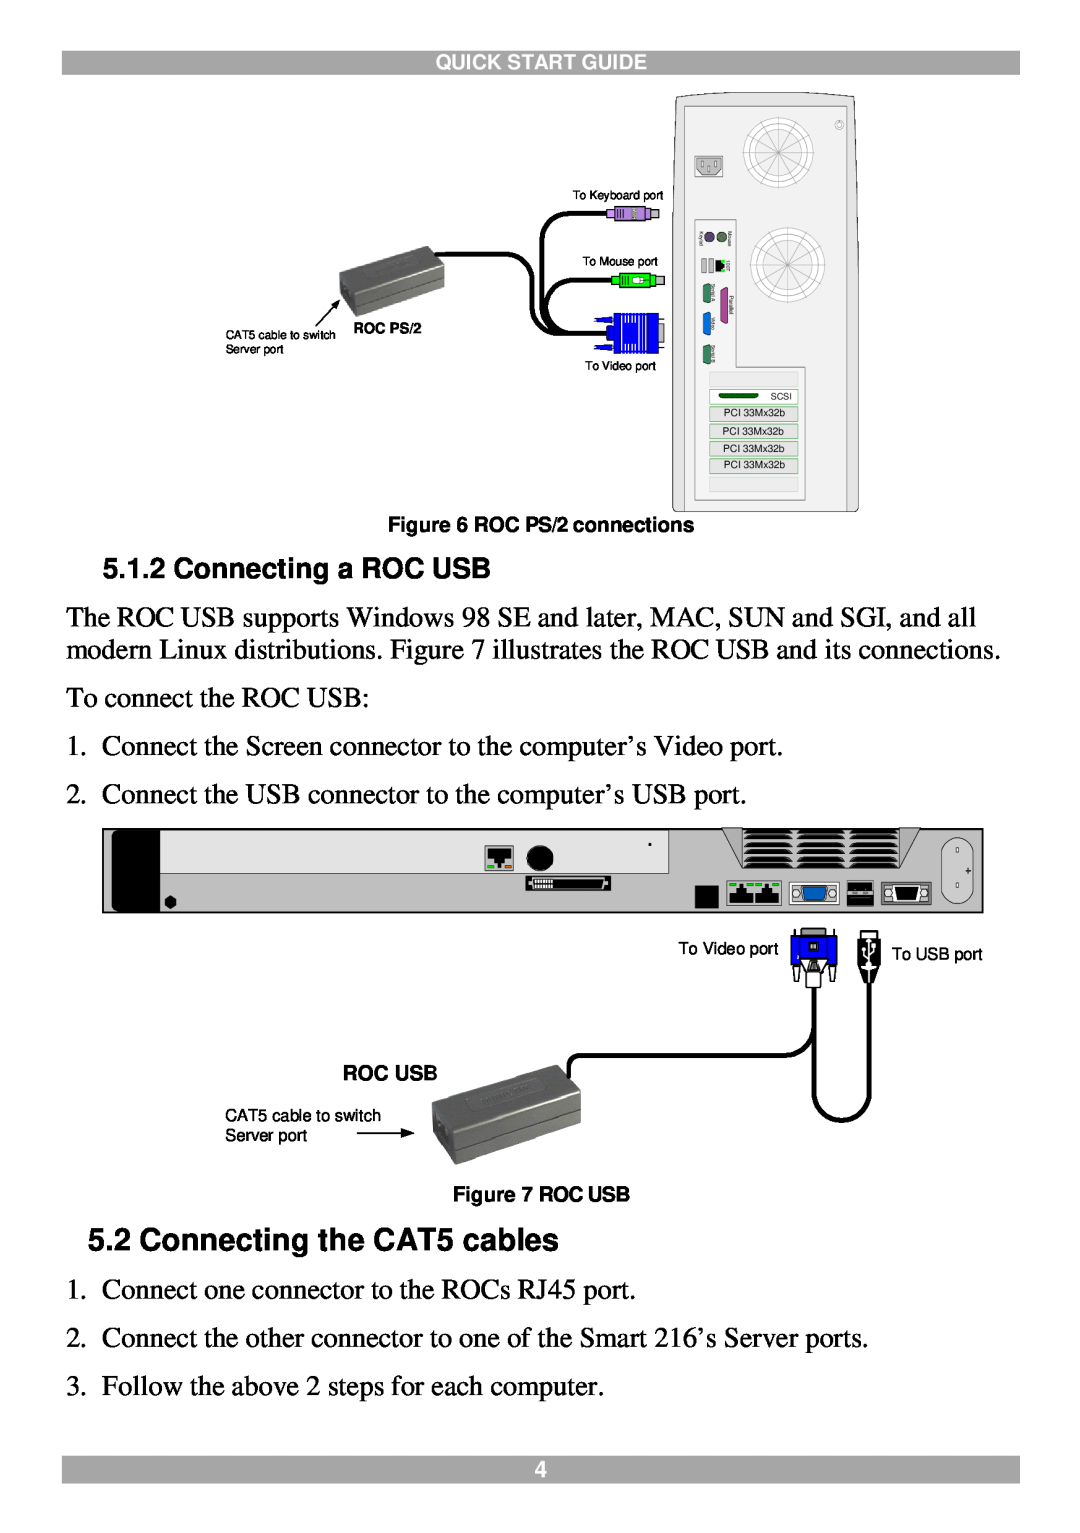 Tripp Lite 232, 216 quick start Connecting the CAT5 cables, Connecting a ROC USB 